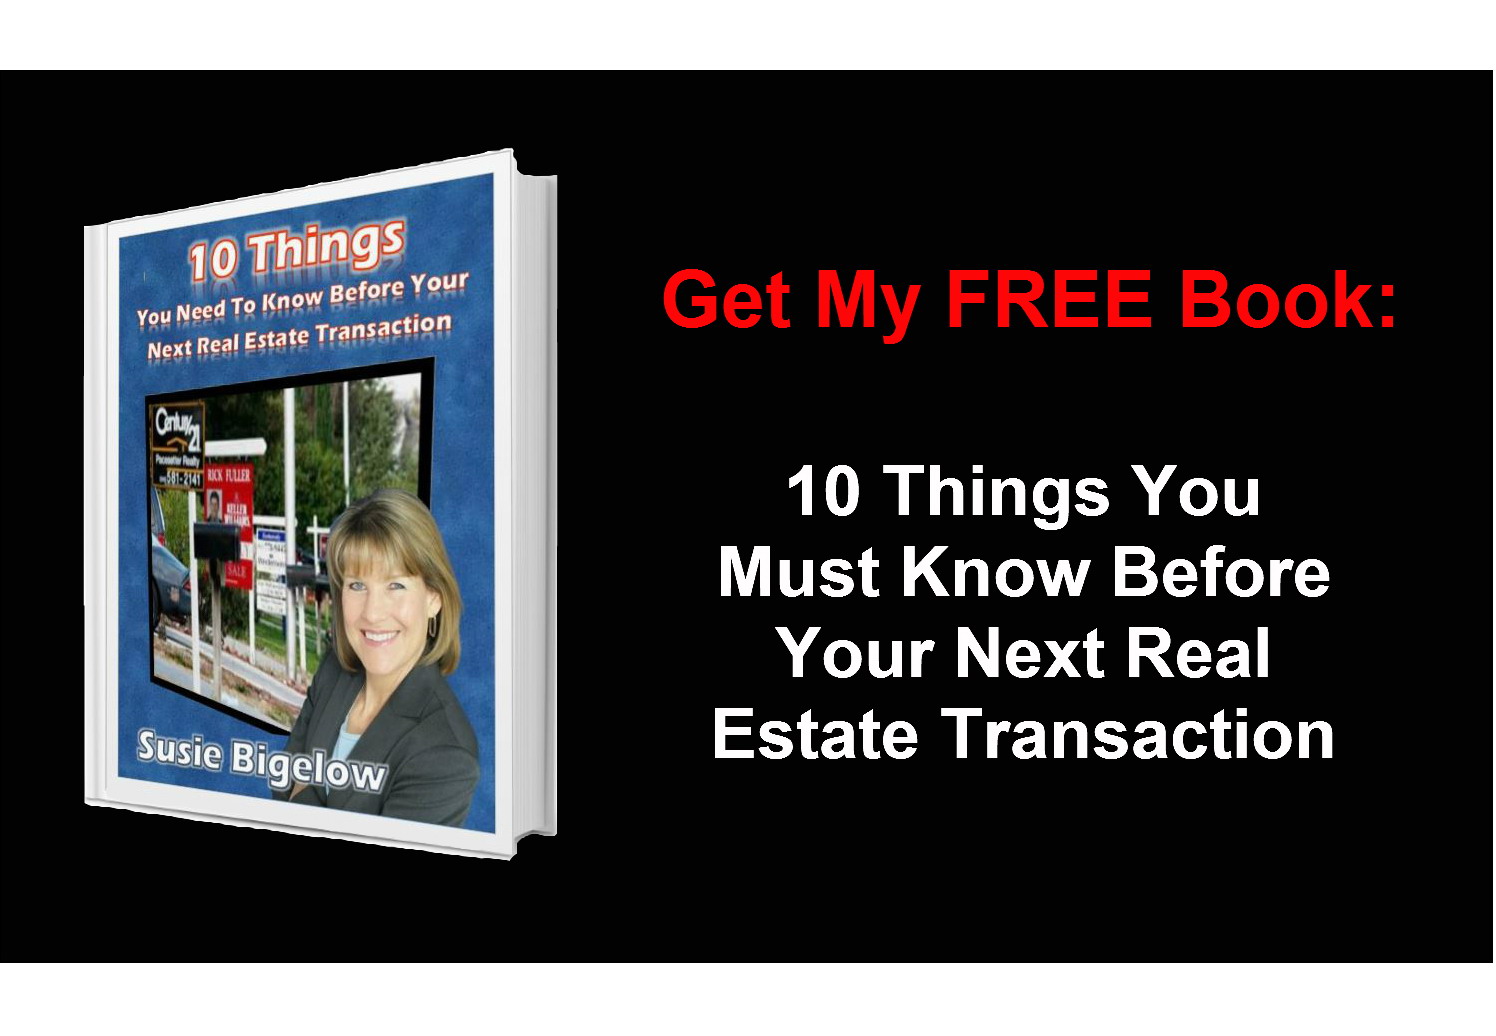 Get My FREE Book - 10 Things You Must Know Before Your Next Real Estate Transaction- http://www.SusieB.remaxagent.com